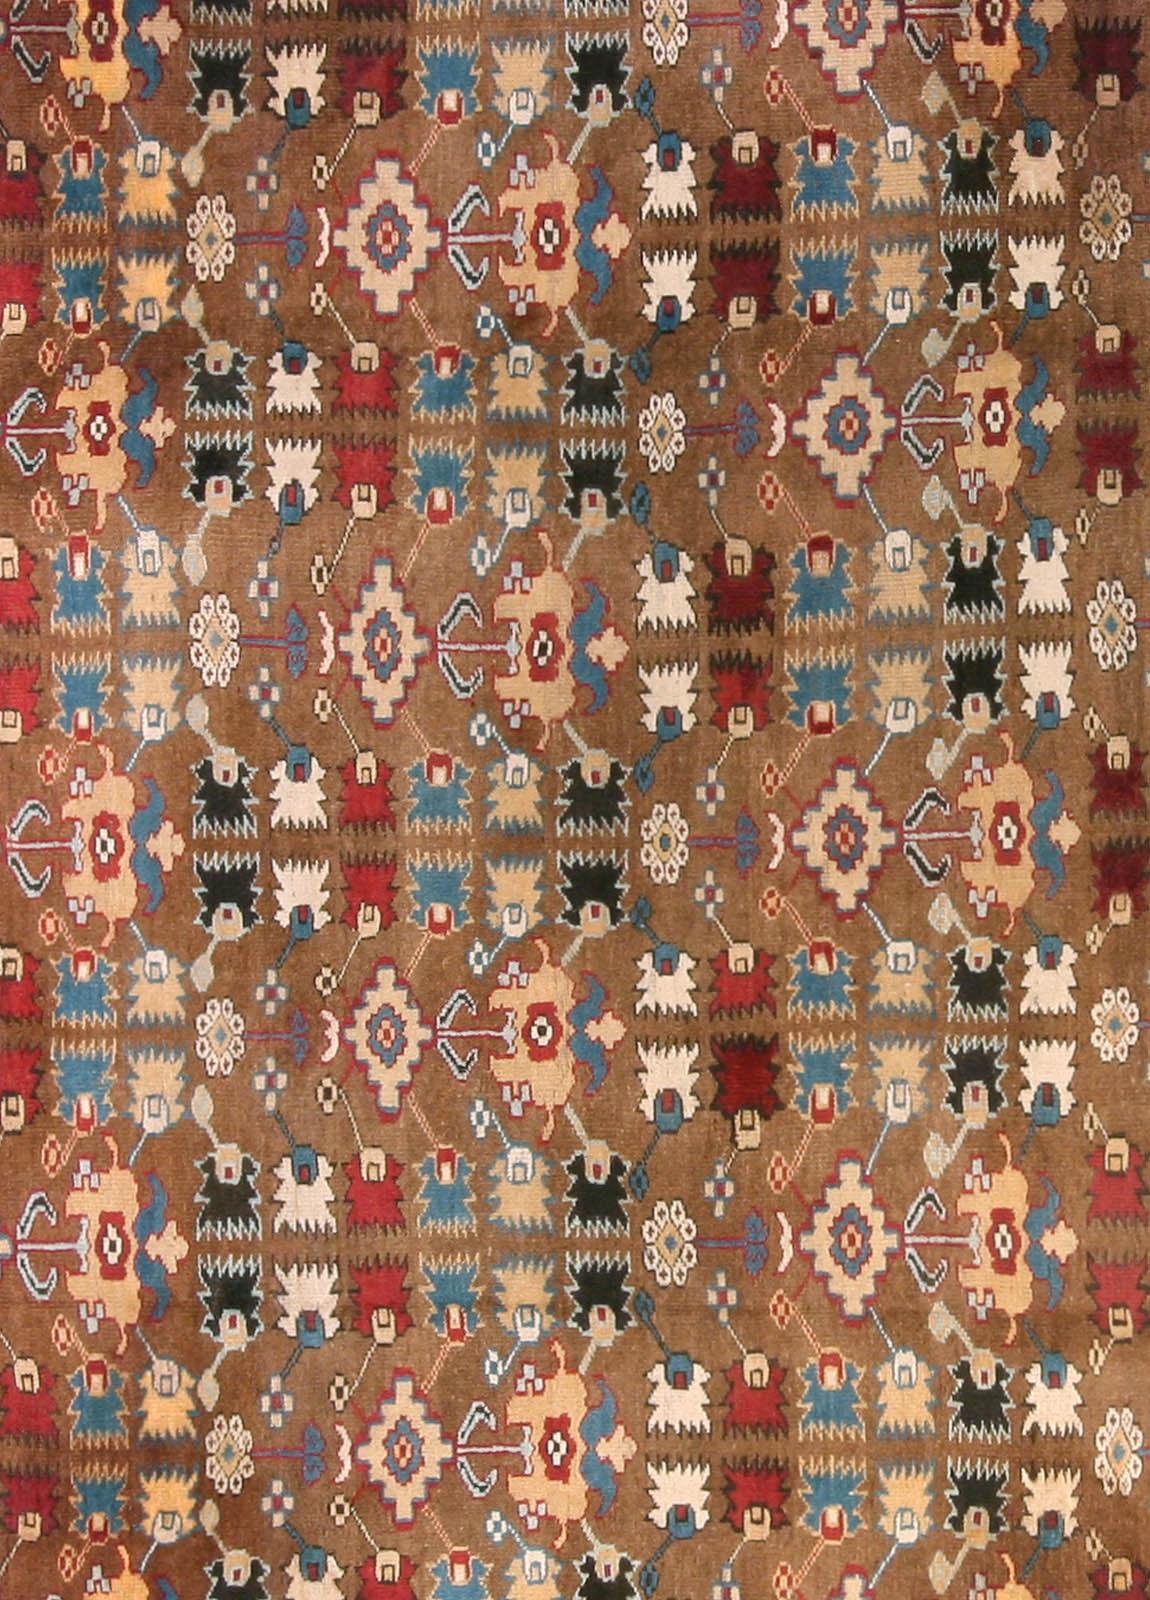 Early 20th Century Indian Handmade Wool Rug
Size: 10'5